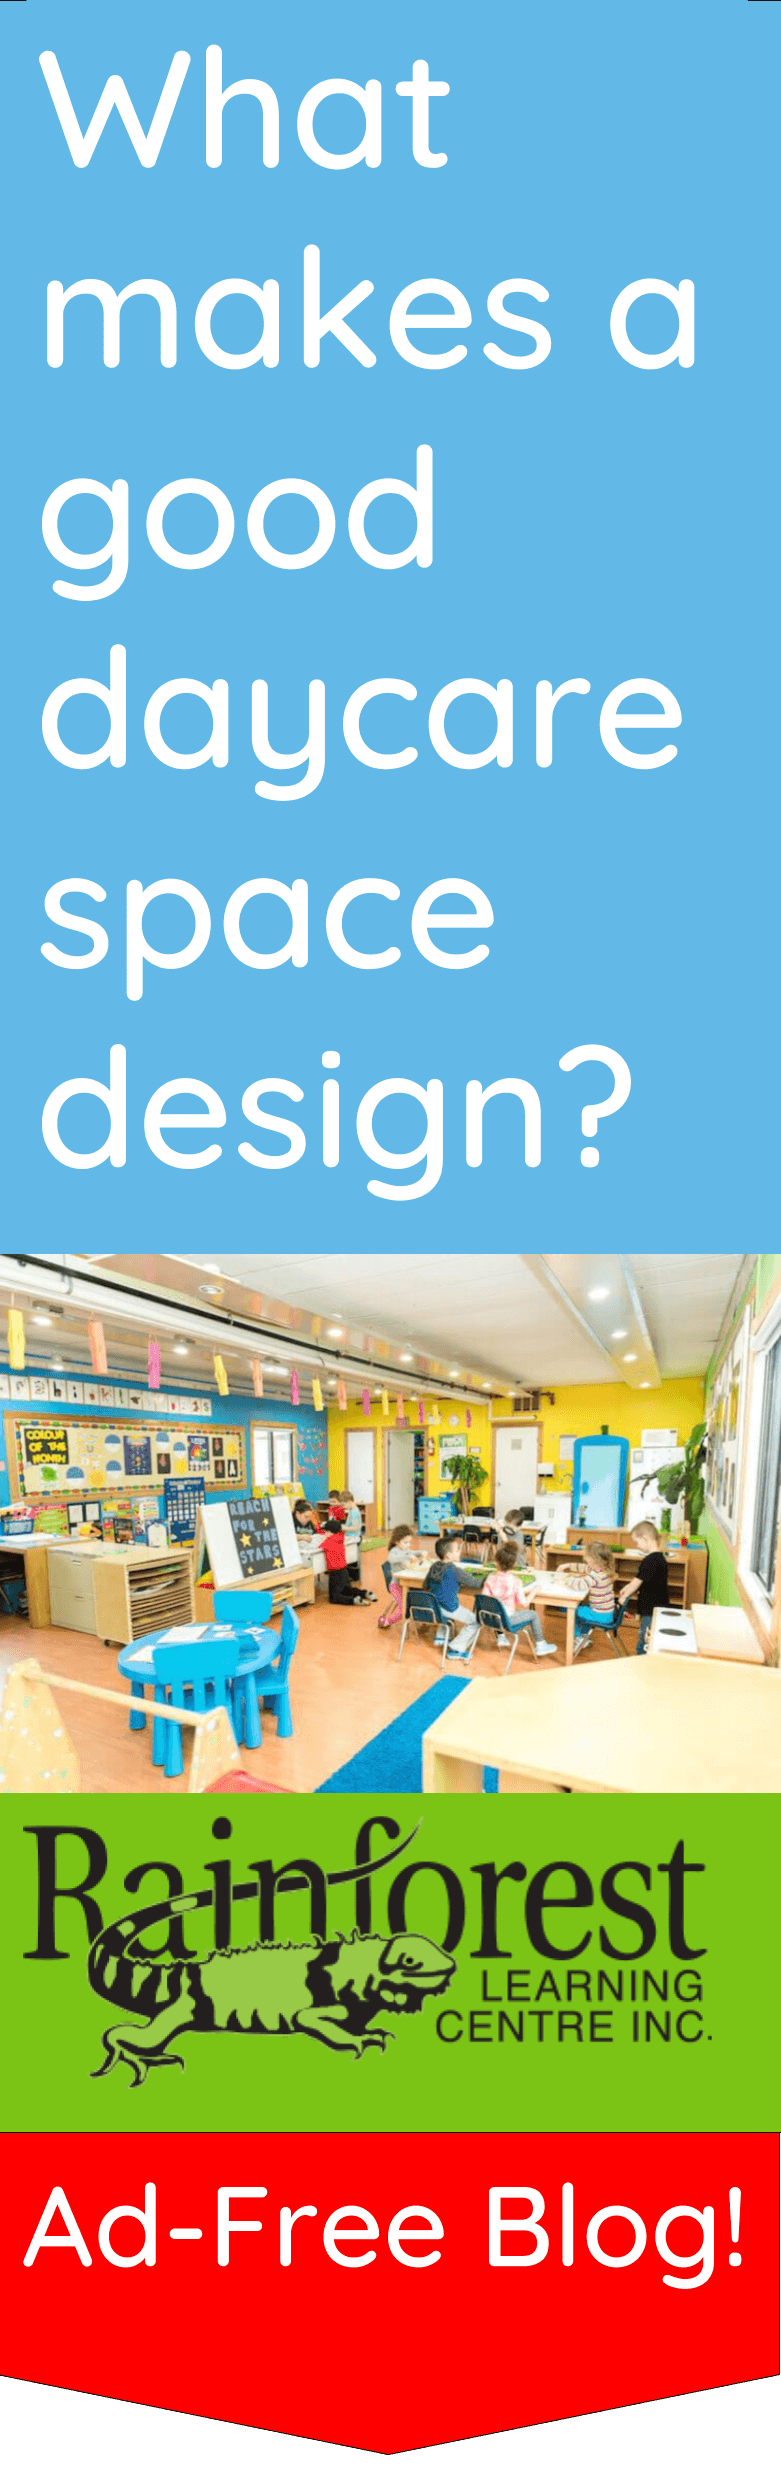 What makes a good daycare space design? - pinterest image